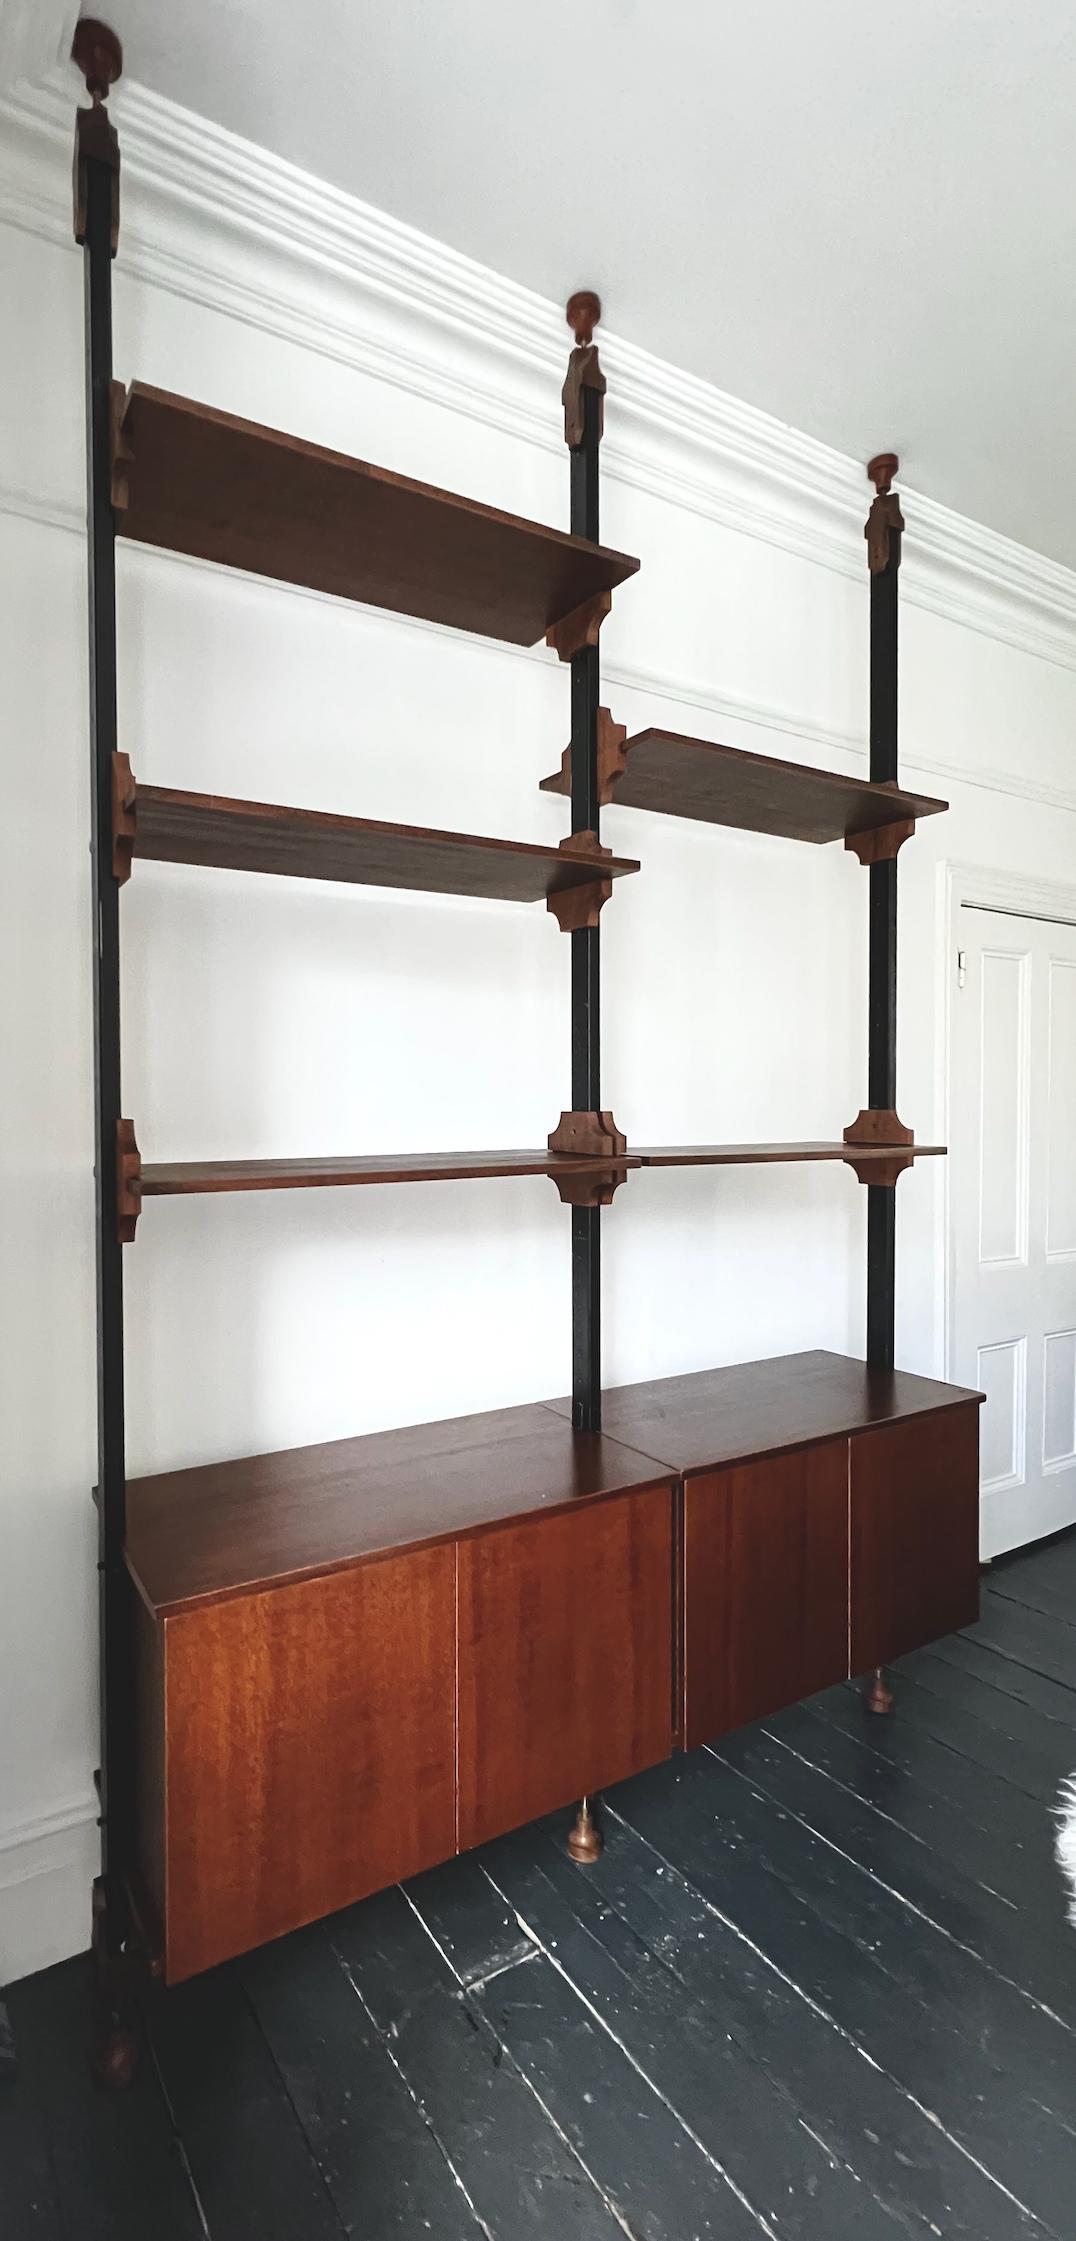 A floor-to-ceiling shelving unit, with space for both display and storage. Italy, second half 20th century. Designer unknown.

The set is made of wood, finished in walnut, with black metal uprights running between the floor and ceiling. The larger